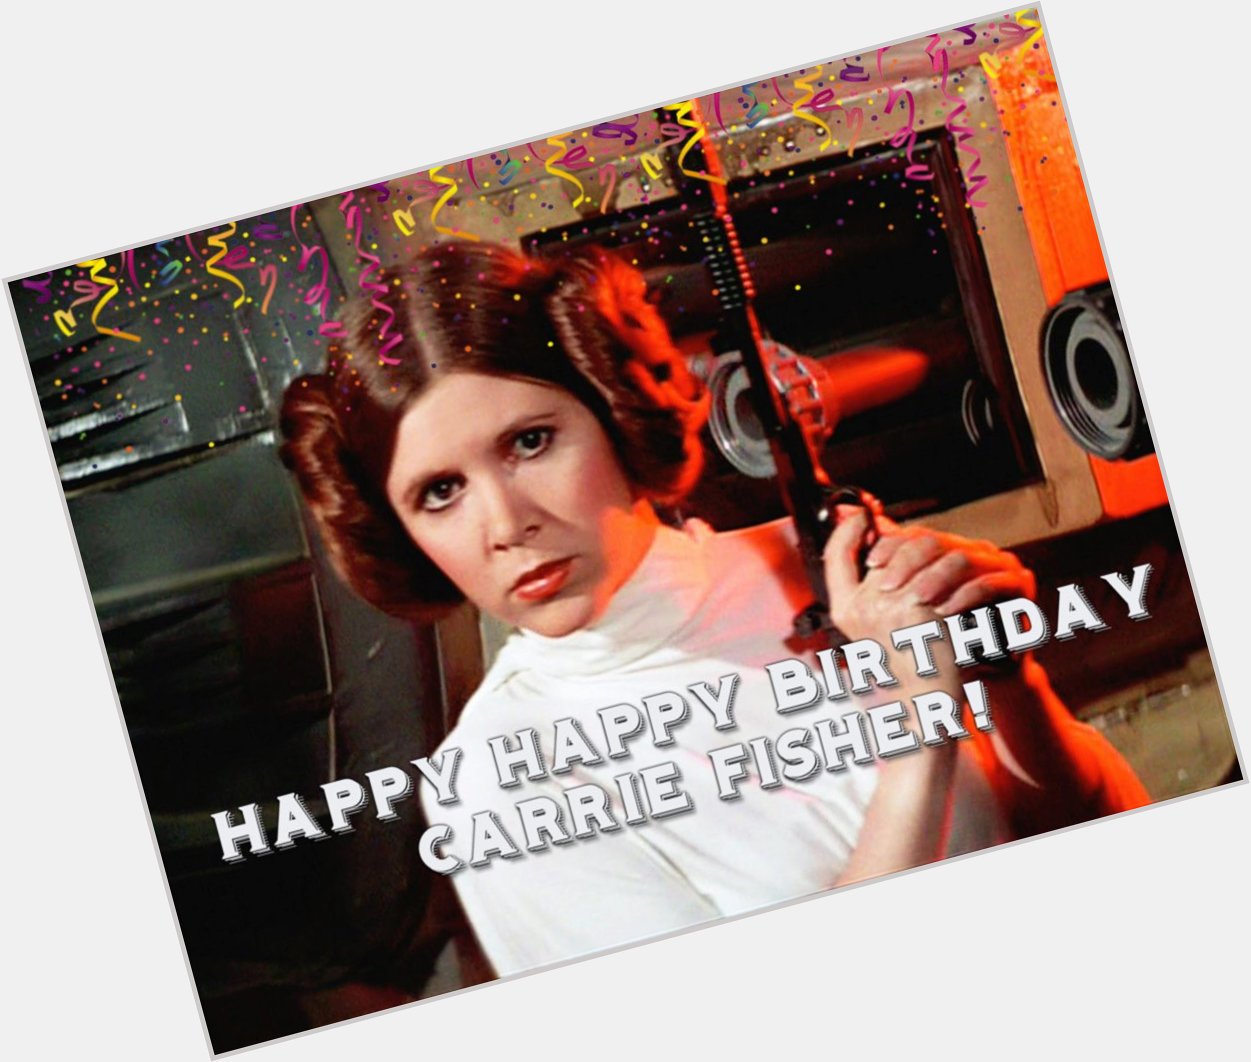 HAPPY BIRTHDAY CARRIE FISHER!  